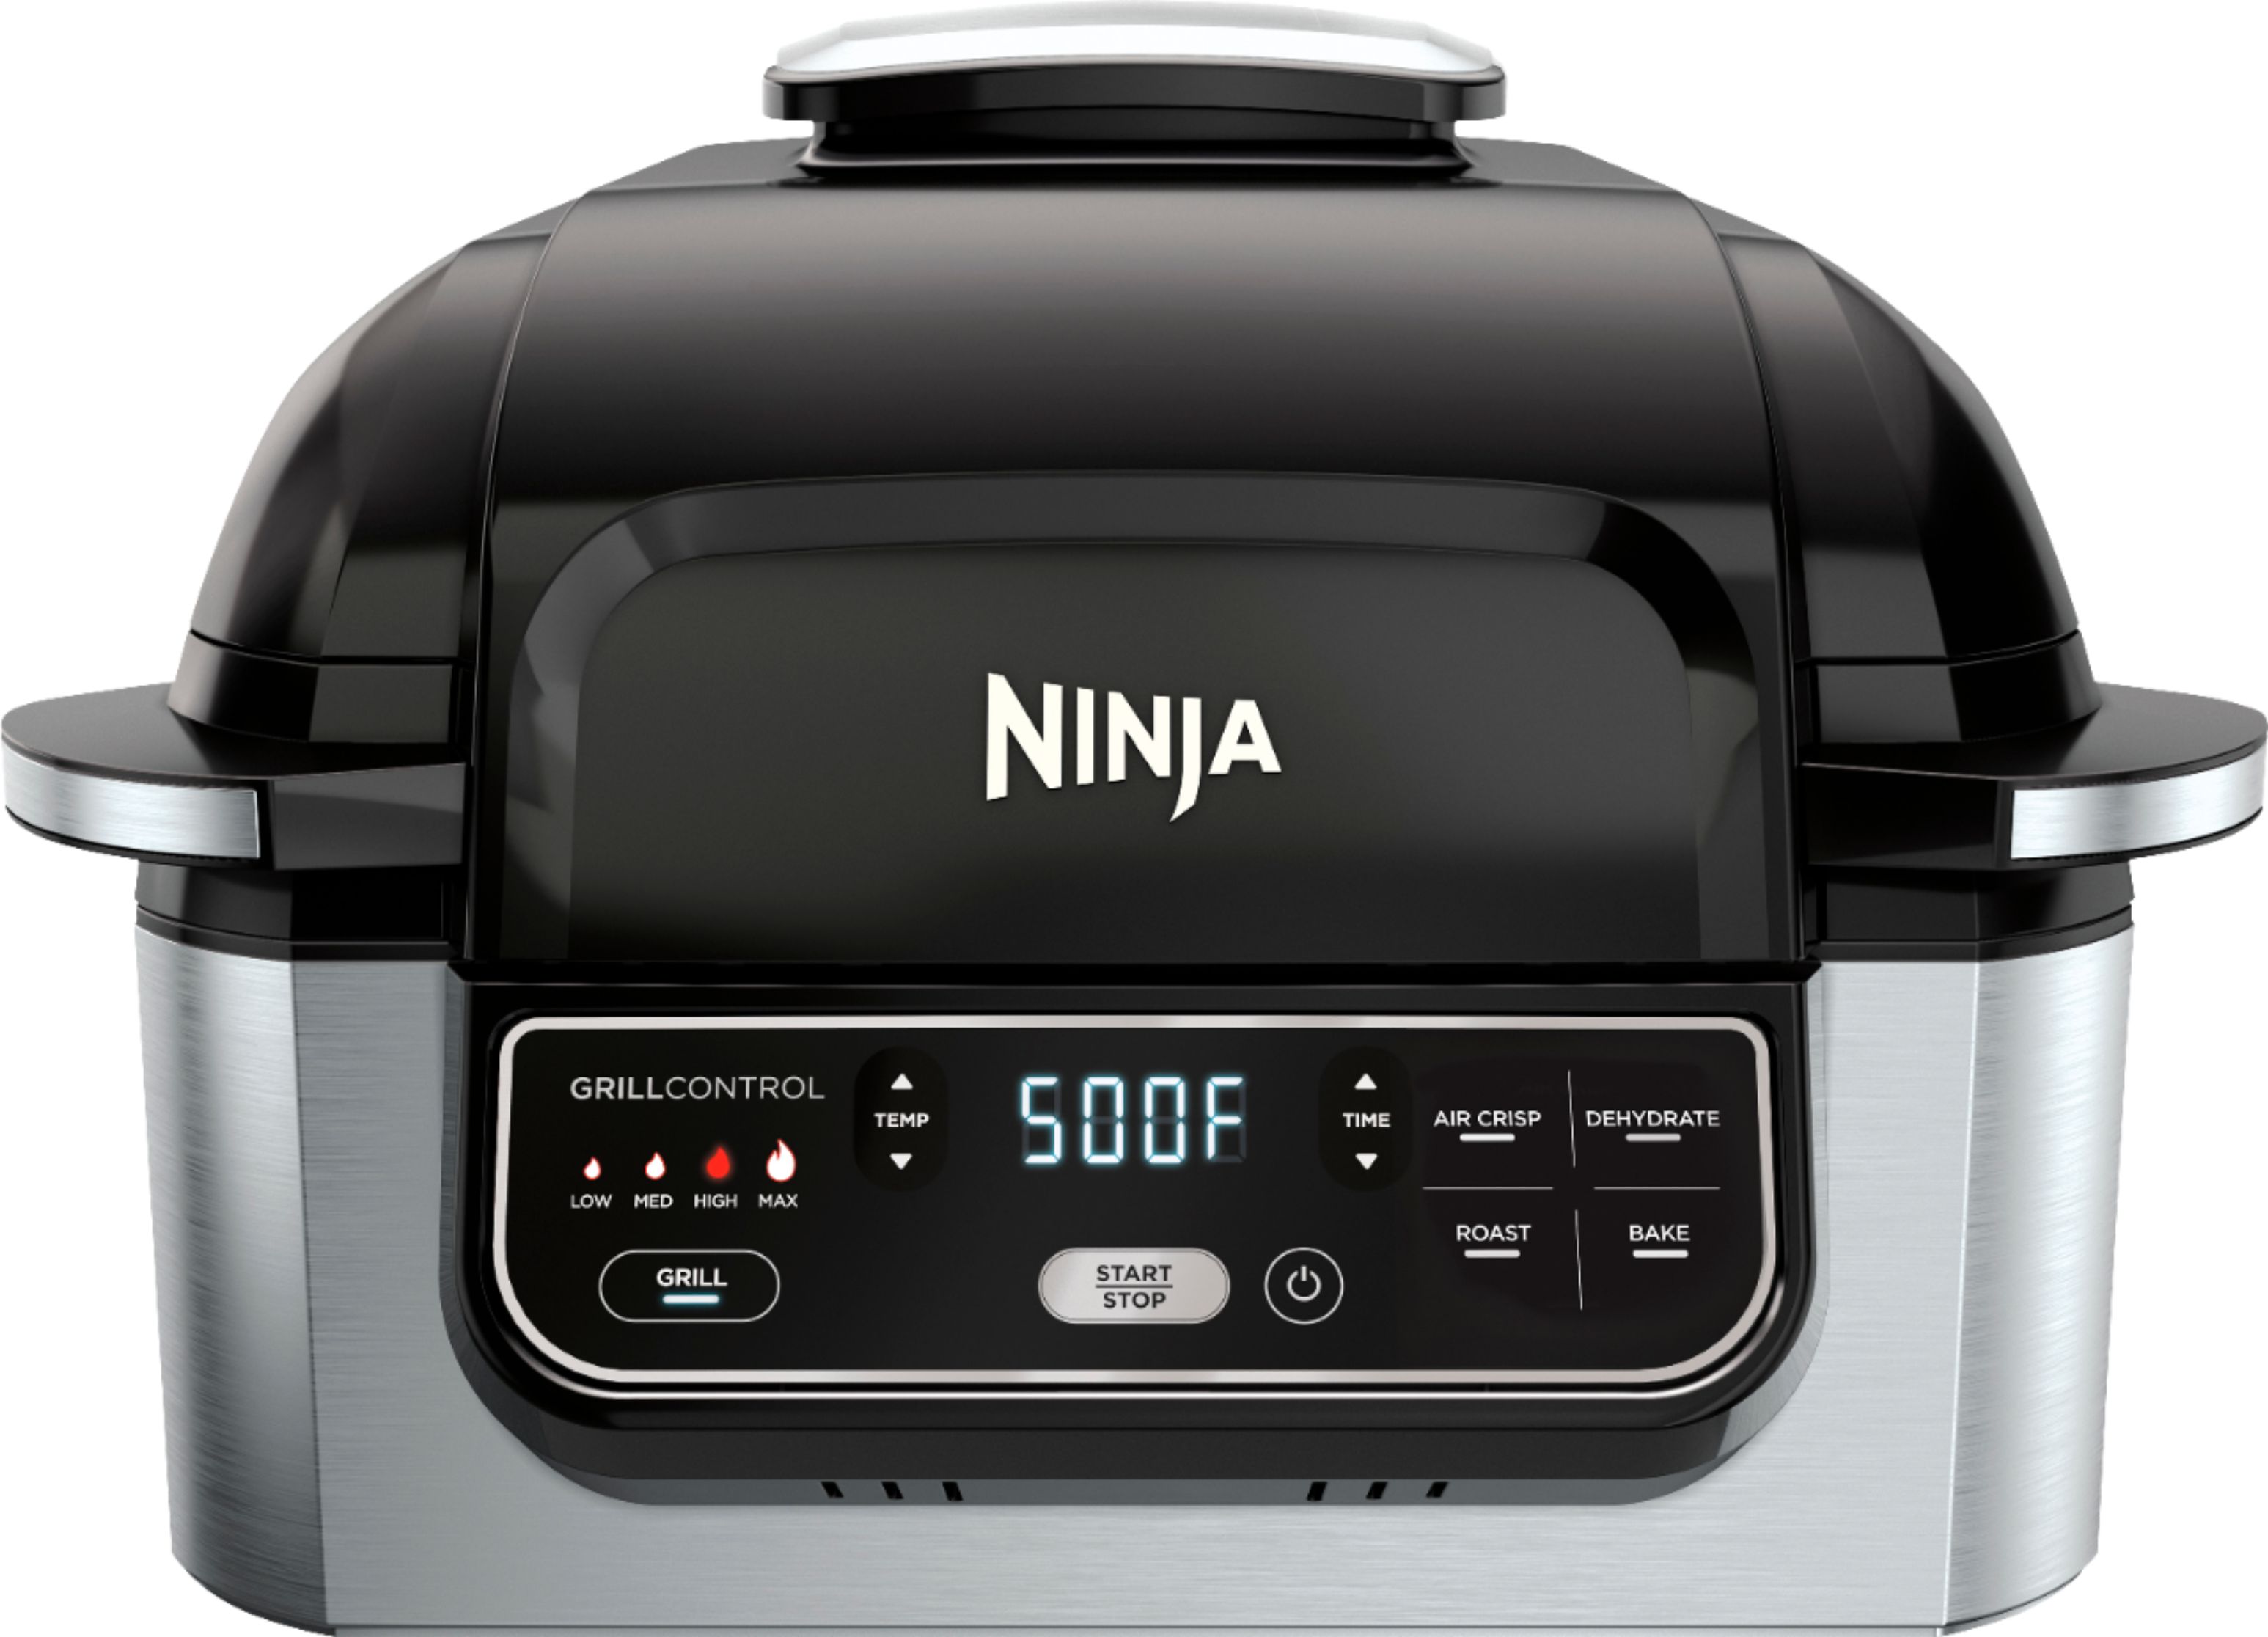 Ninja Foodi XL Pro 5-in-1 Indoor Grill & Griddle with 4-Quart Air Fryer,  Roast, and Bake, IG600, Black 